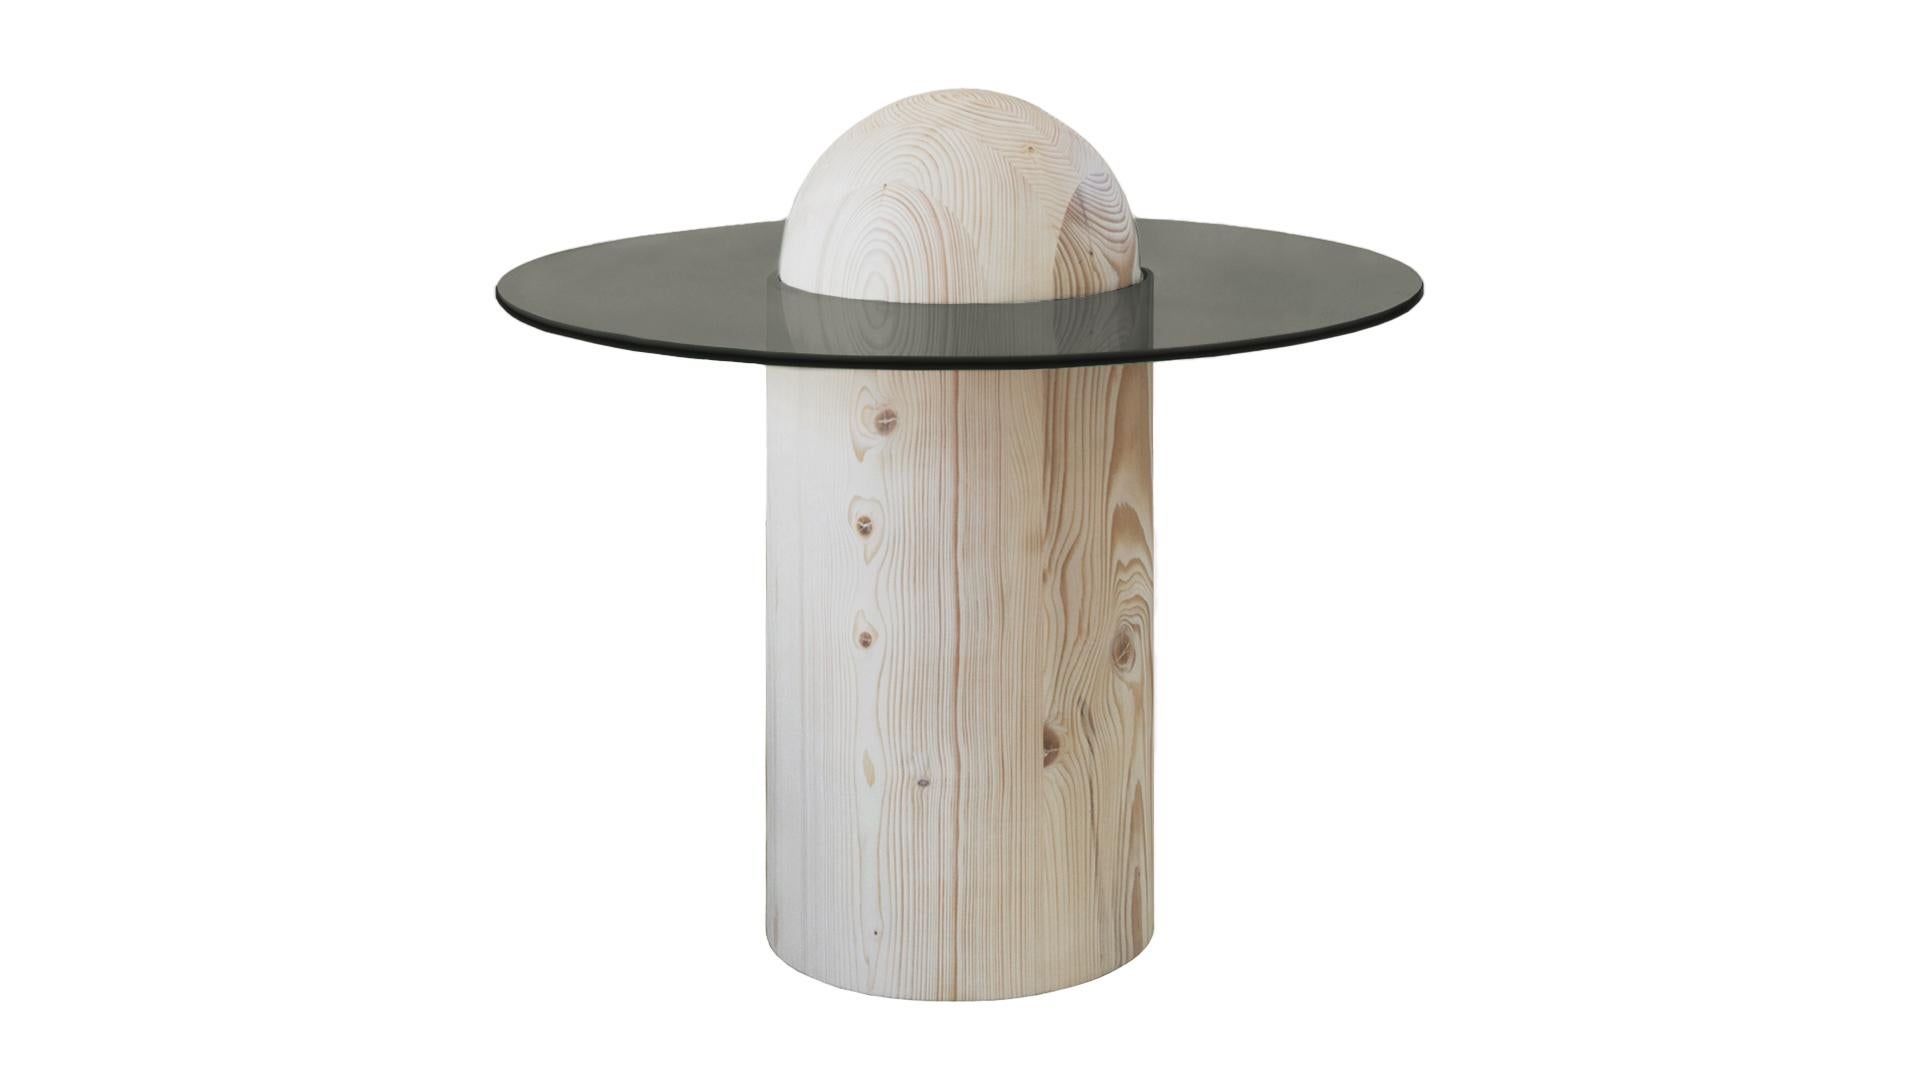 Lotta side table by LI-AN-LO Studio
Dimensions: ø 70 x 64 cm.
Materials: Spruce and bronze tempered glass.

Clear or bronze coloured glass top options available.

Lotta is a true rebel, she just could not accept to stay below the